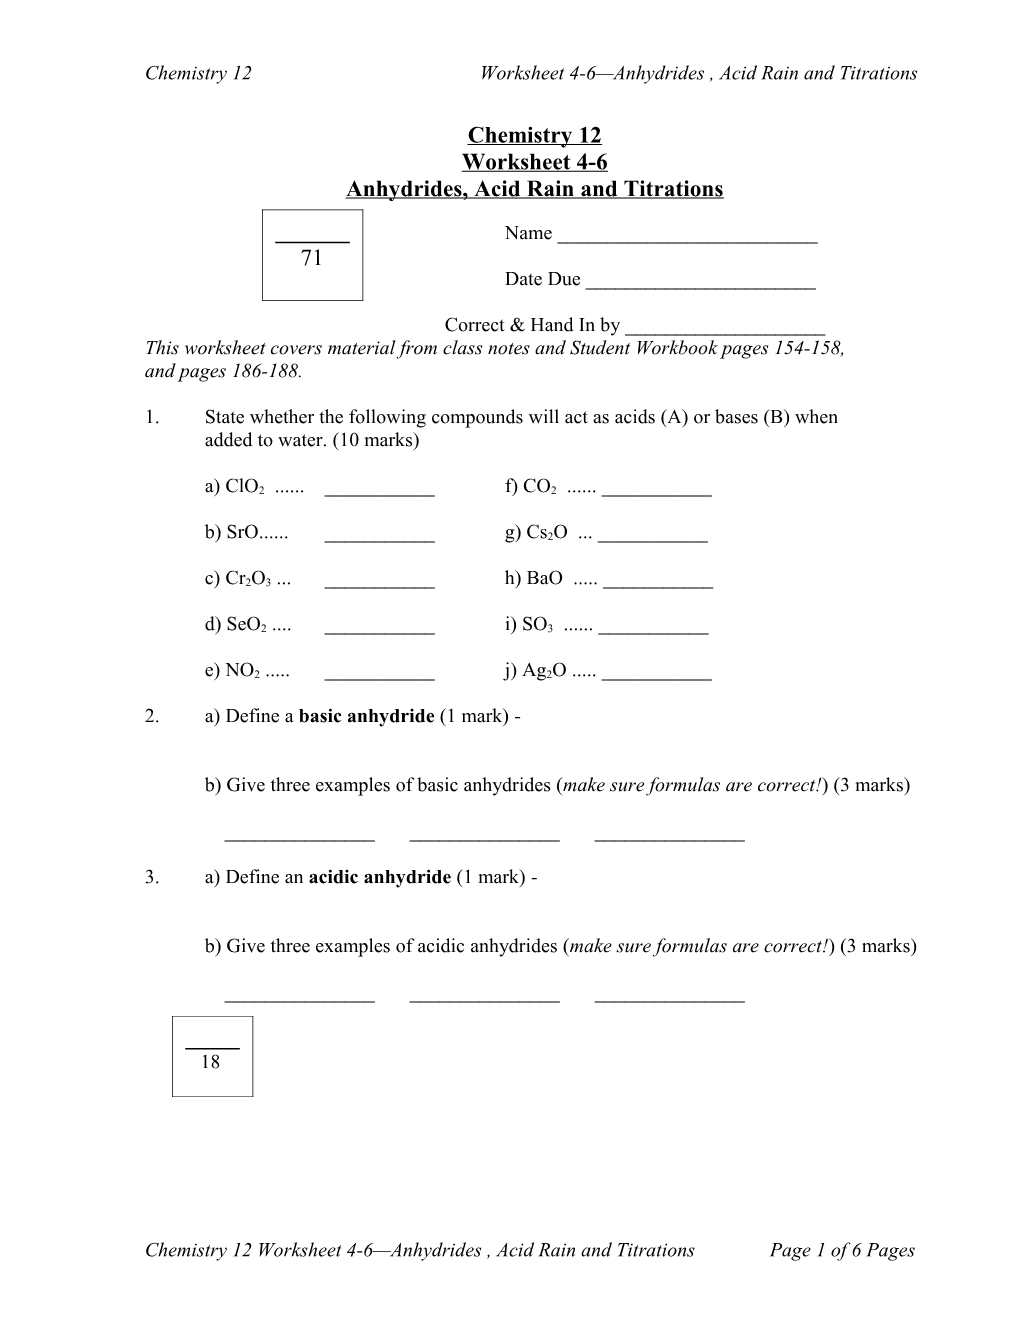 Chemistry 12 Worksheet 4-6 Anhydrides , Acid Rain and Titrations